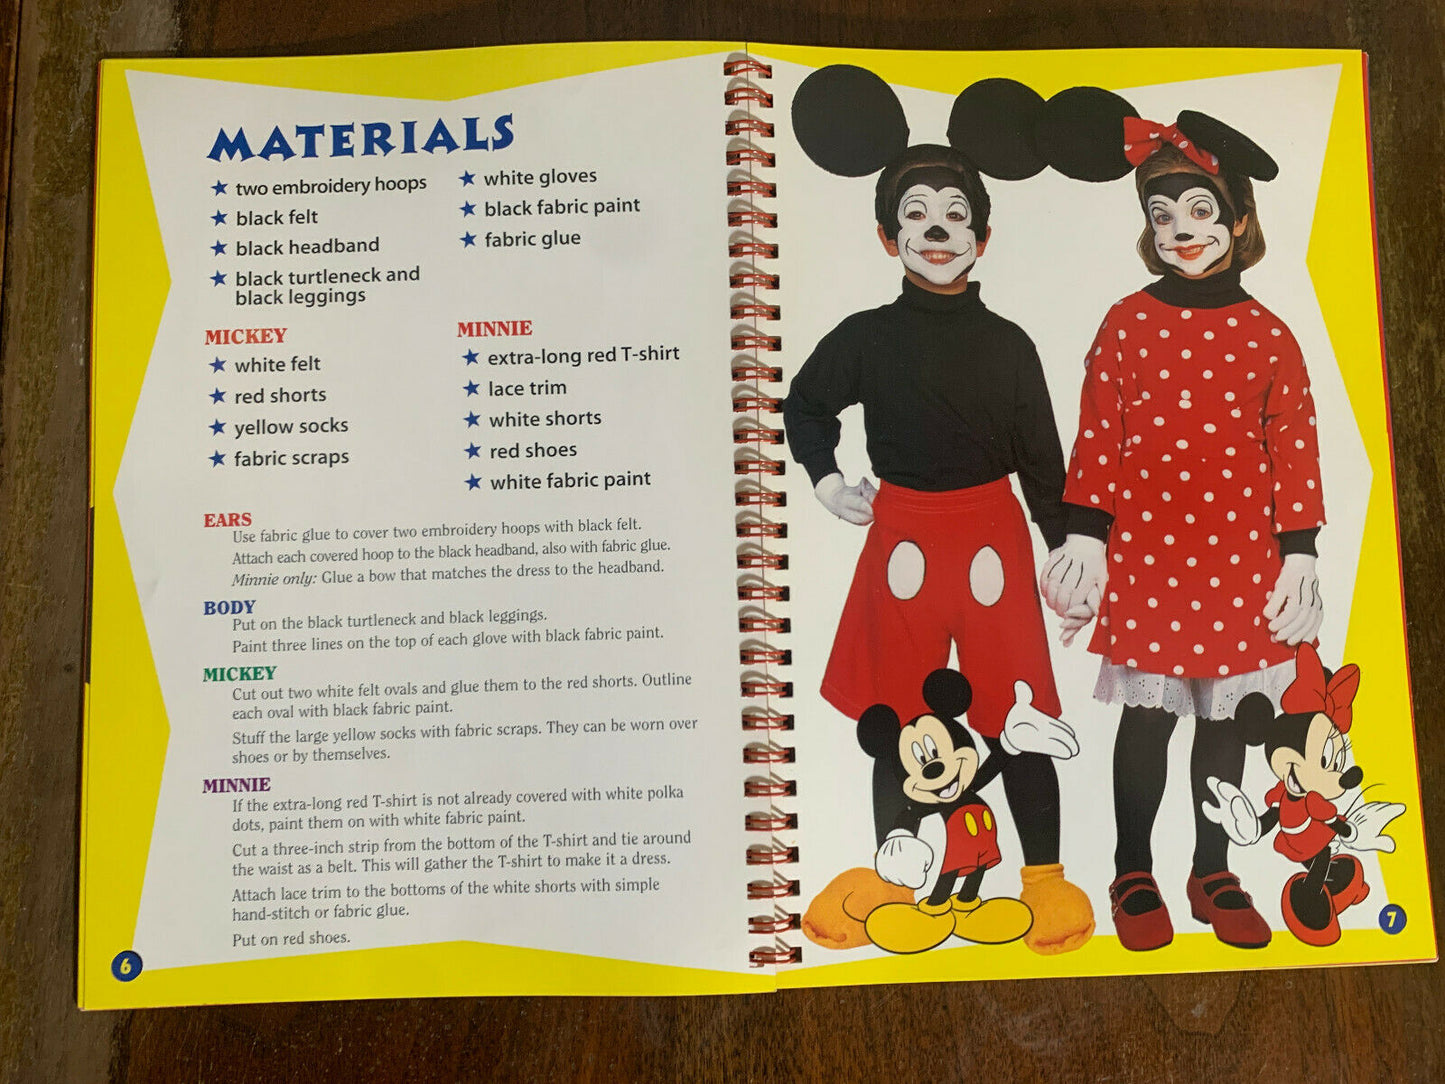 Disney Face Painting & Costume Kit Book Only 1997 (O2)